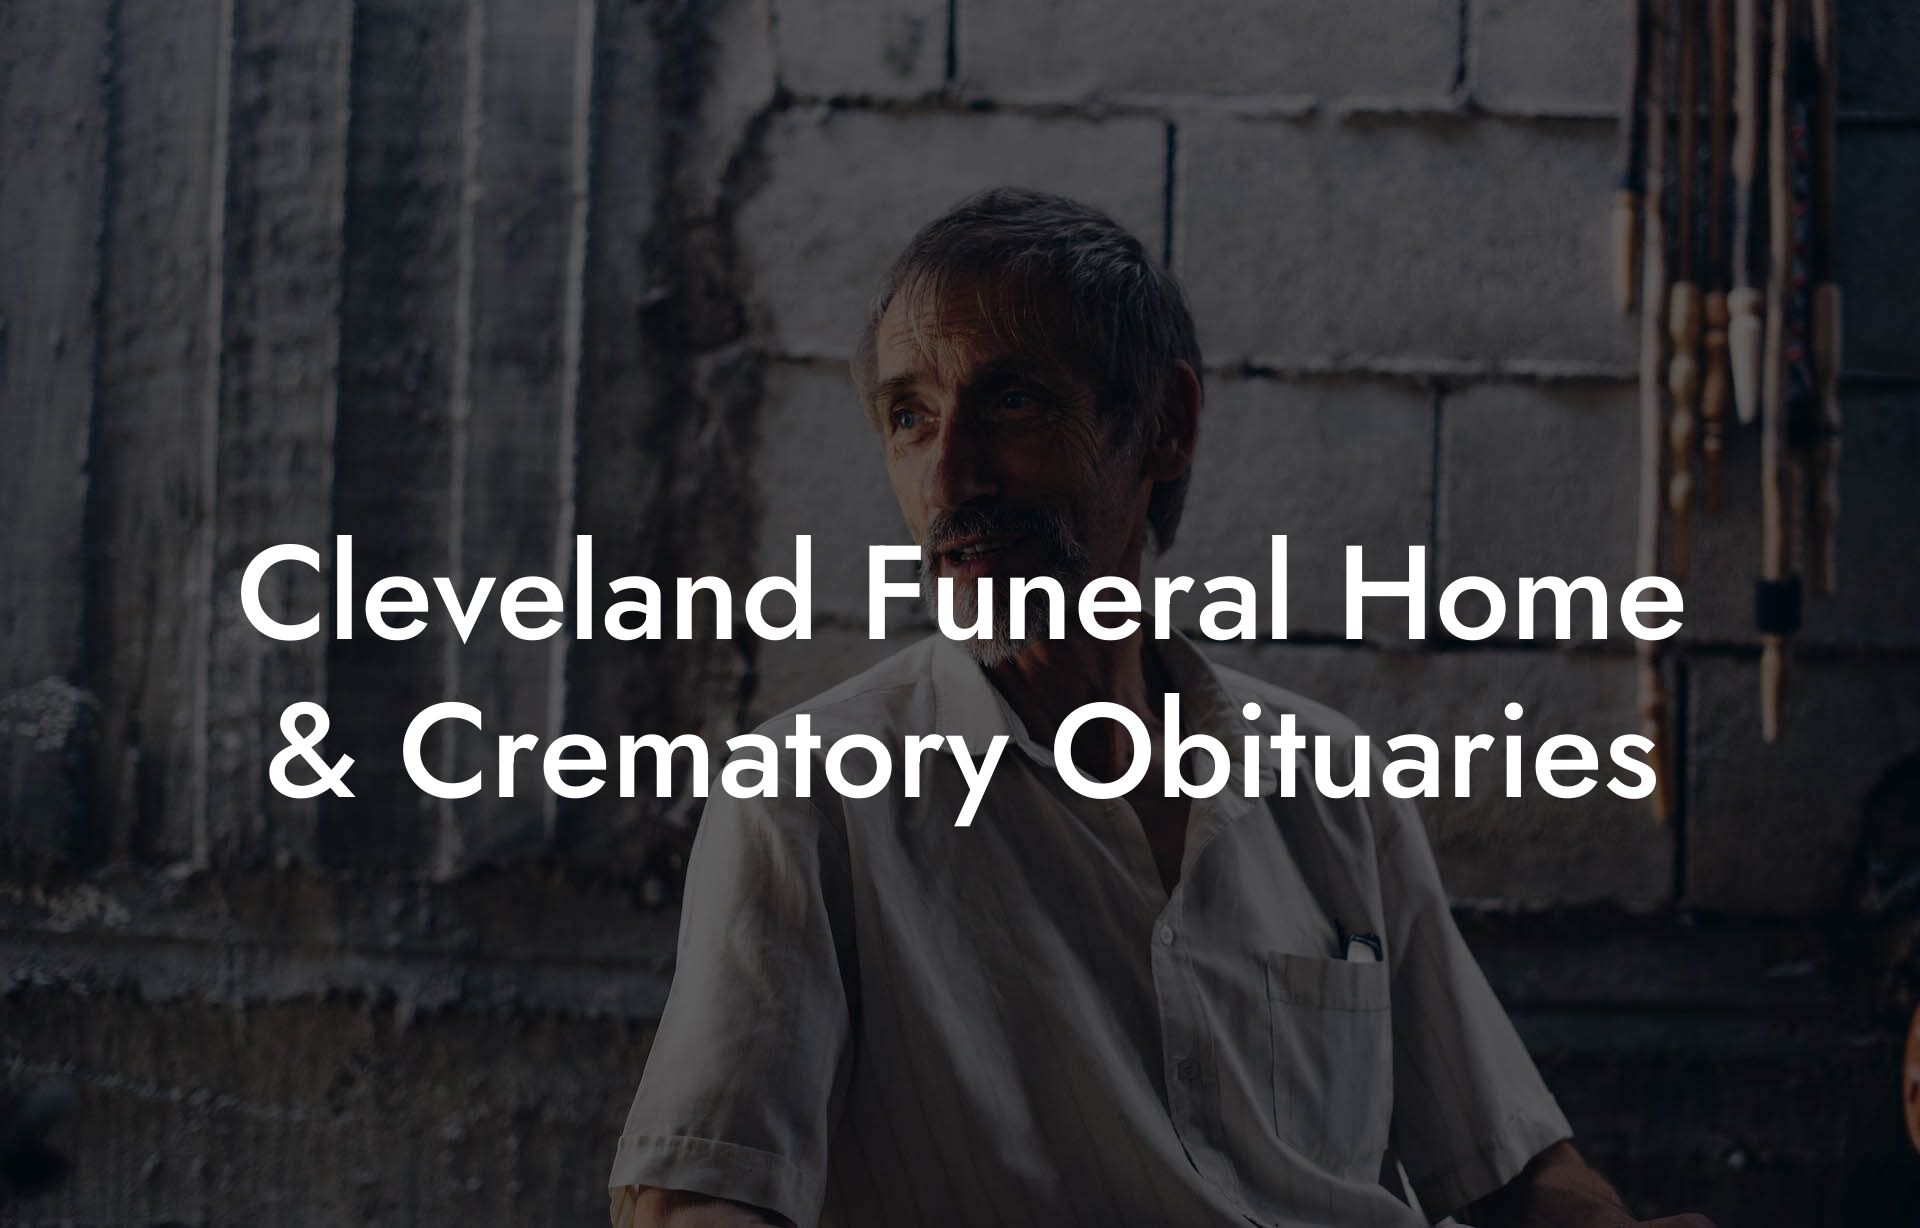 Cleveland Funeral Home & Crematory Obituaries